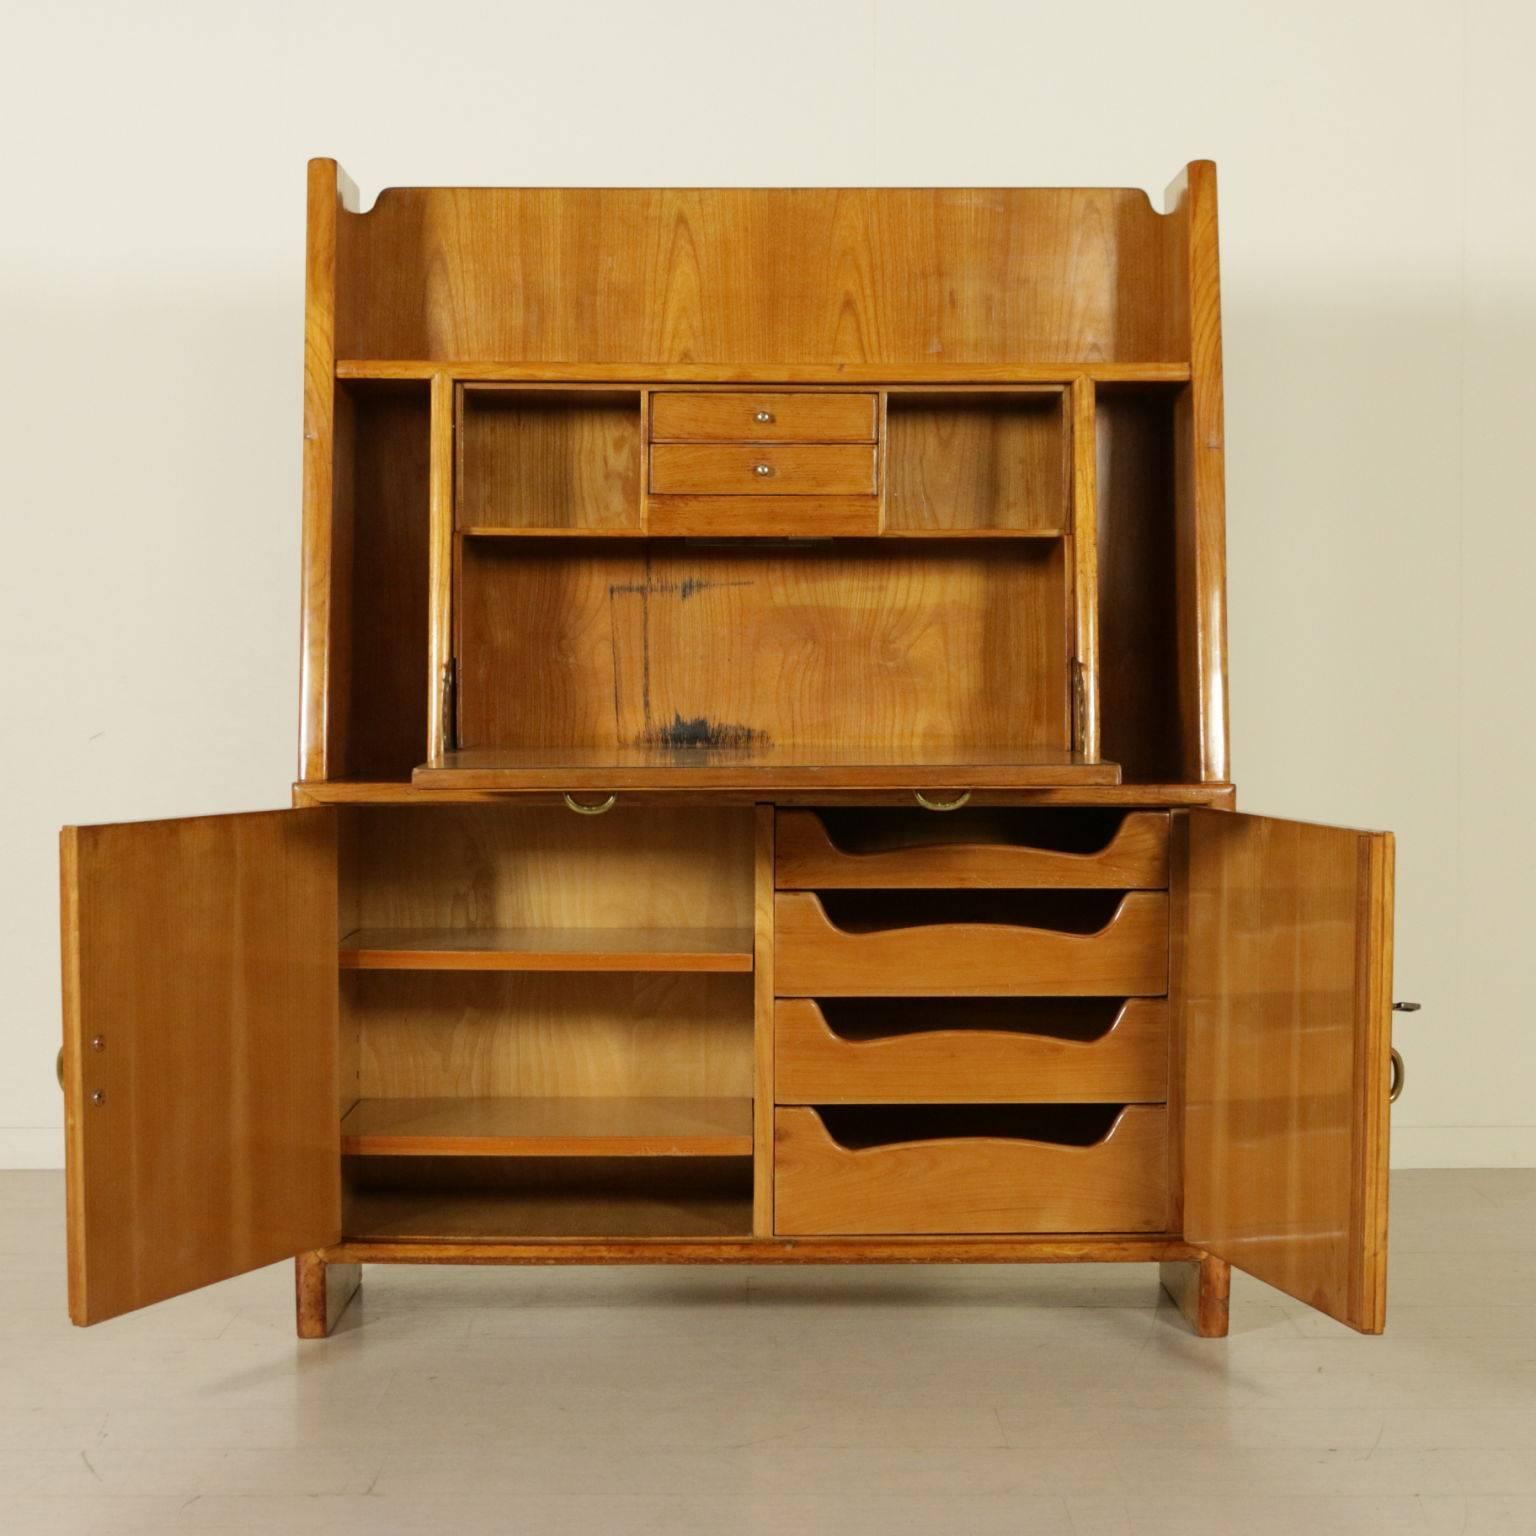 A fall-front desk designed in the style of Osvaldo Borsani, maple veneer and brass handles. Manufactured in Italy, circa 1952